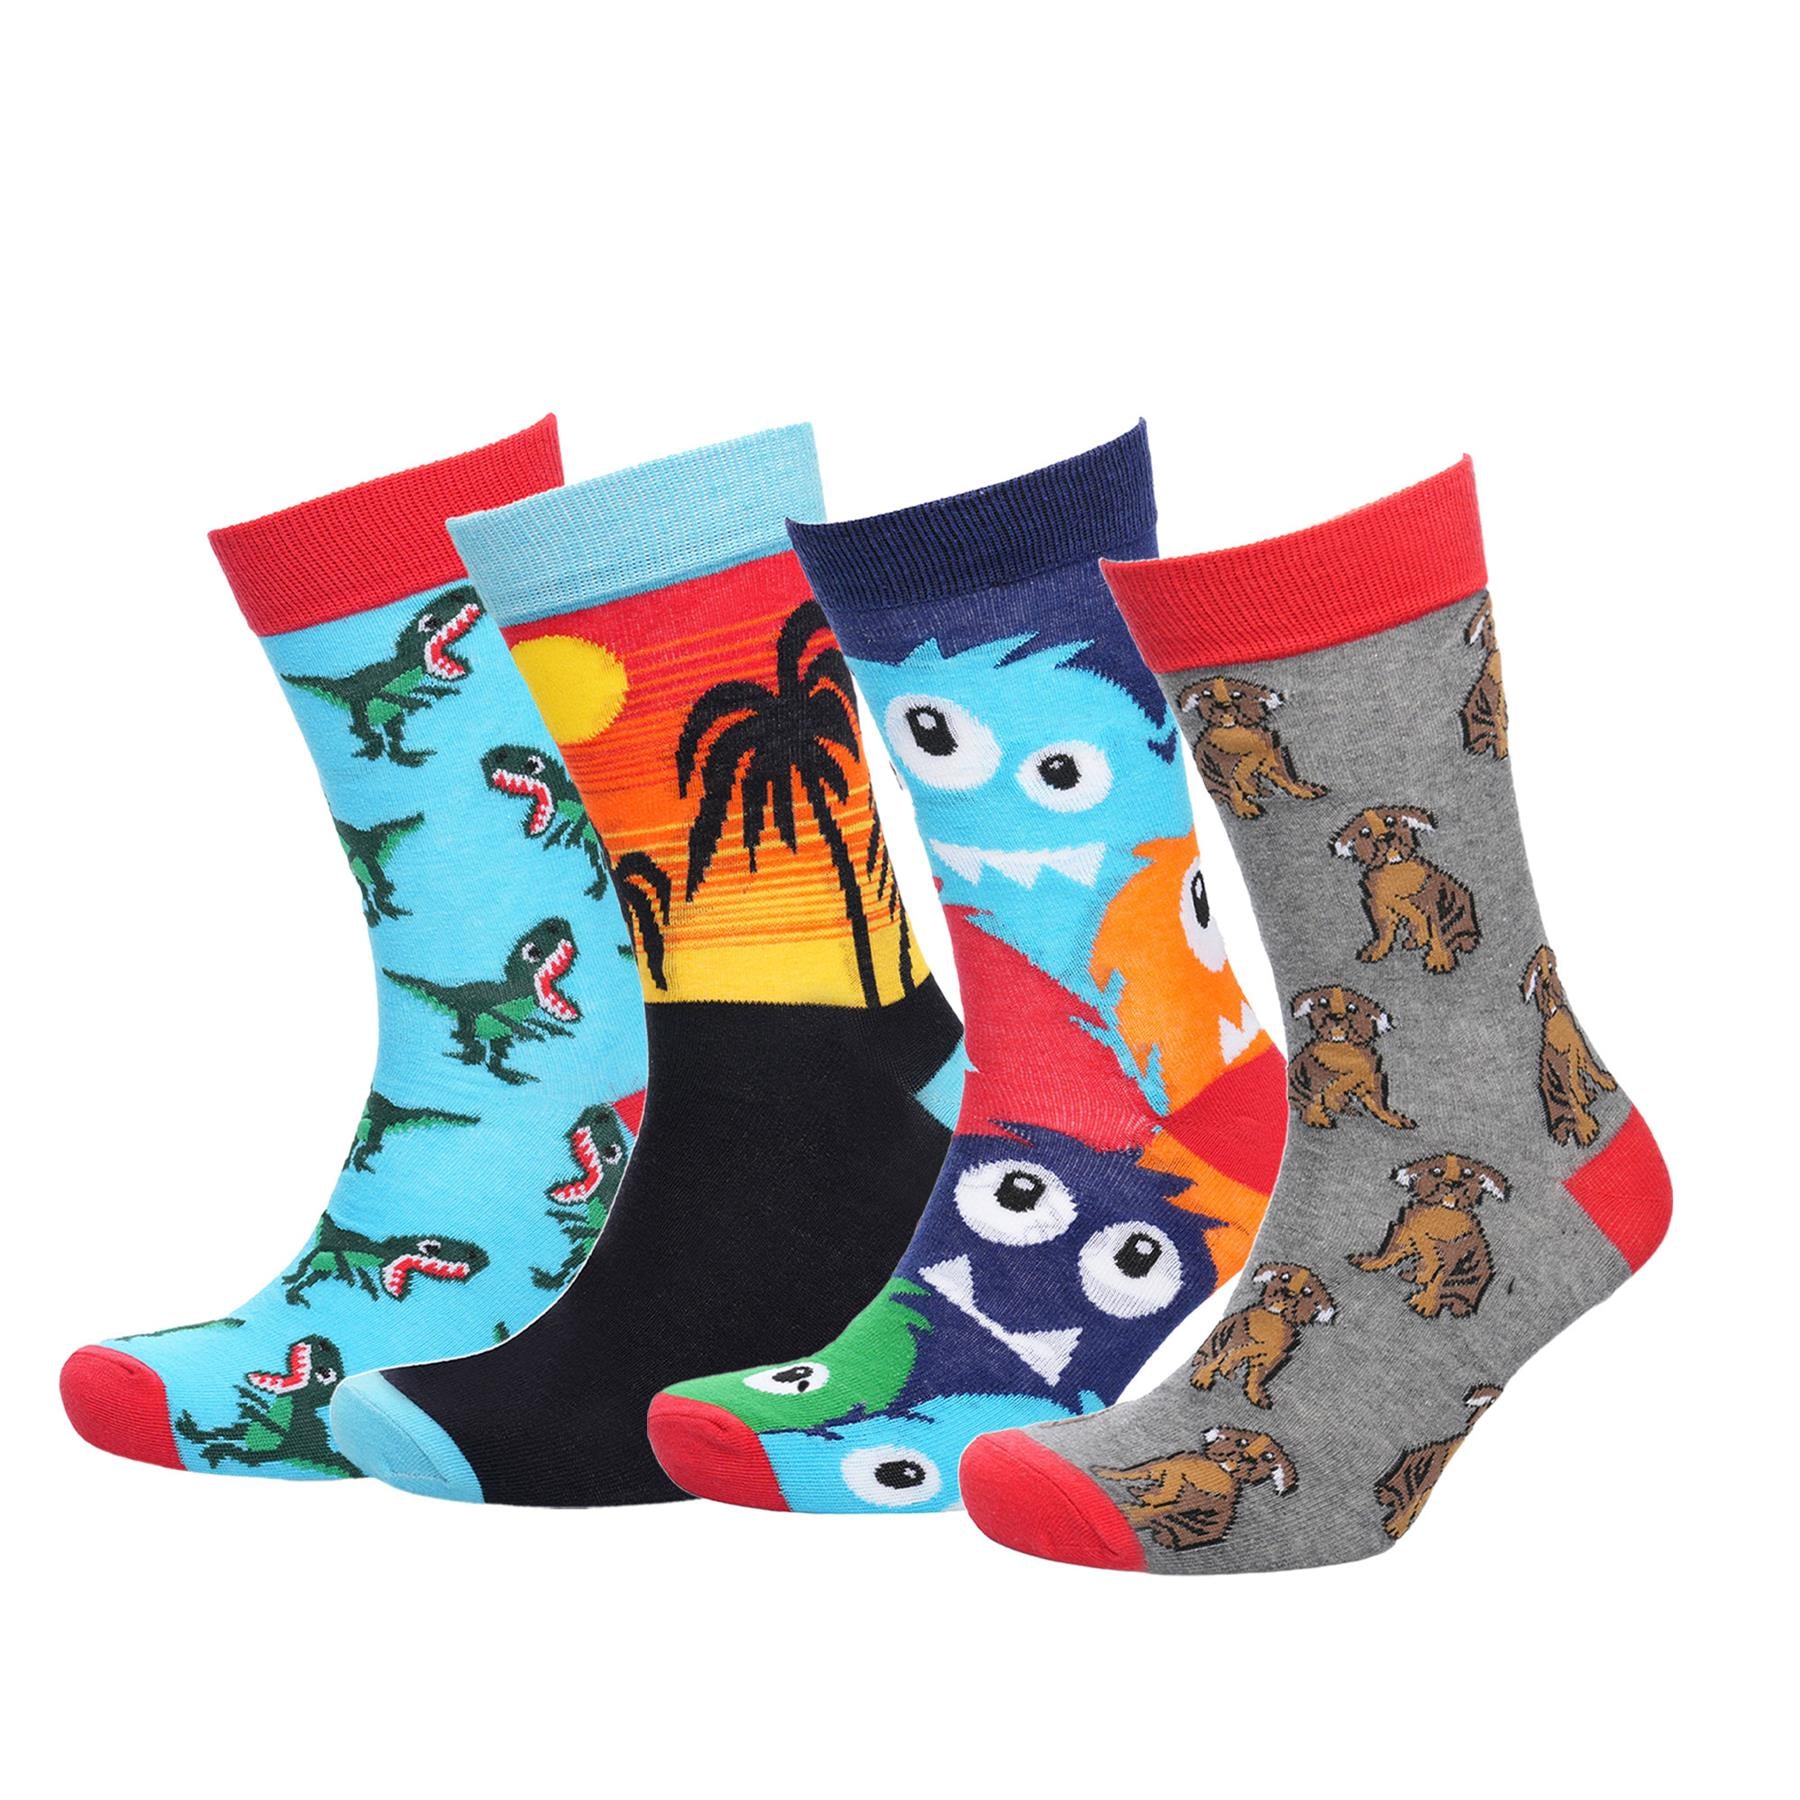 A2Z Mens Novelty Design Cotton Pack Of 4 Comfortable Casual Crew Socks